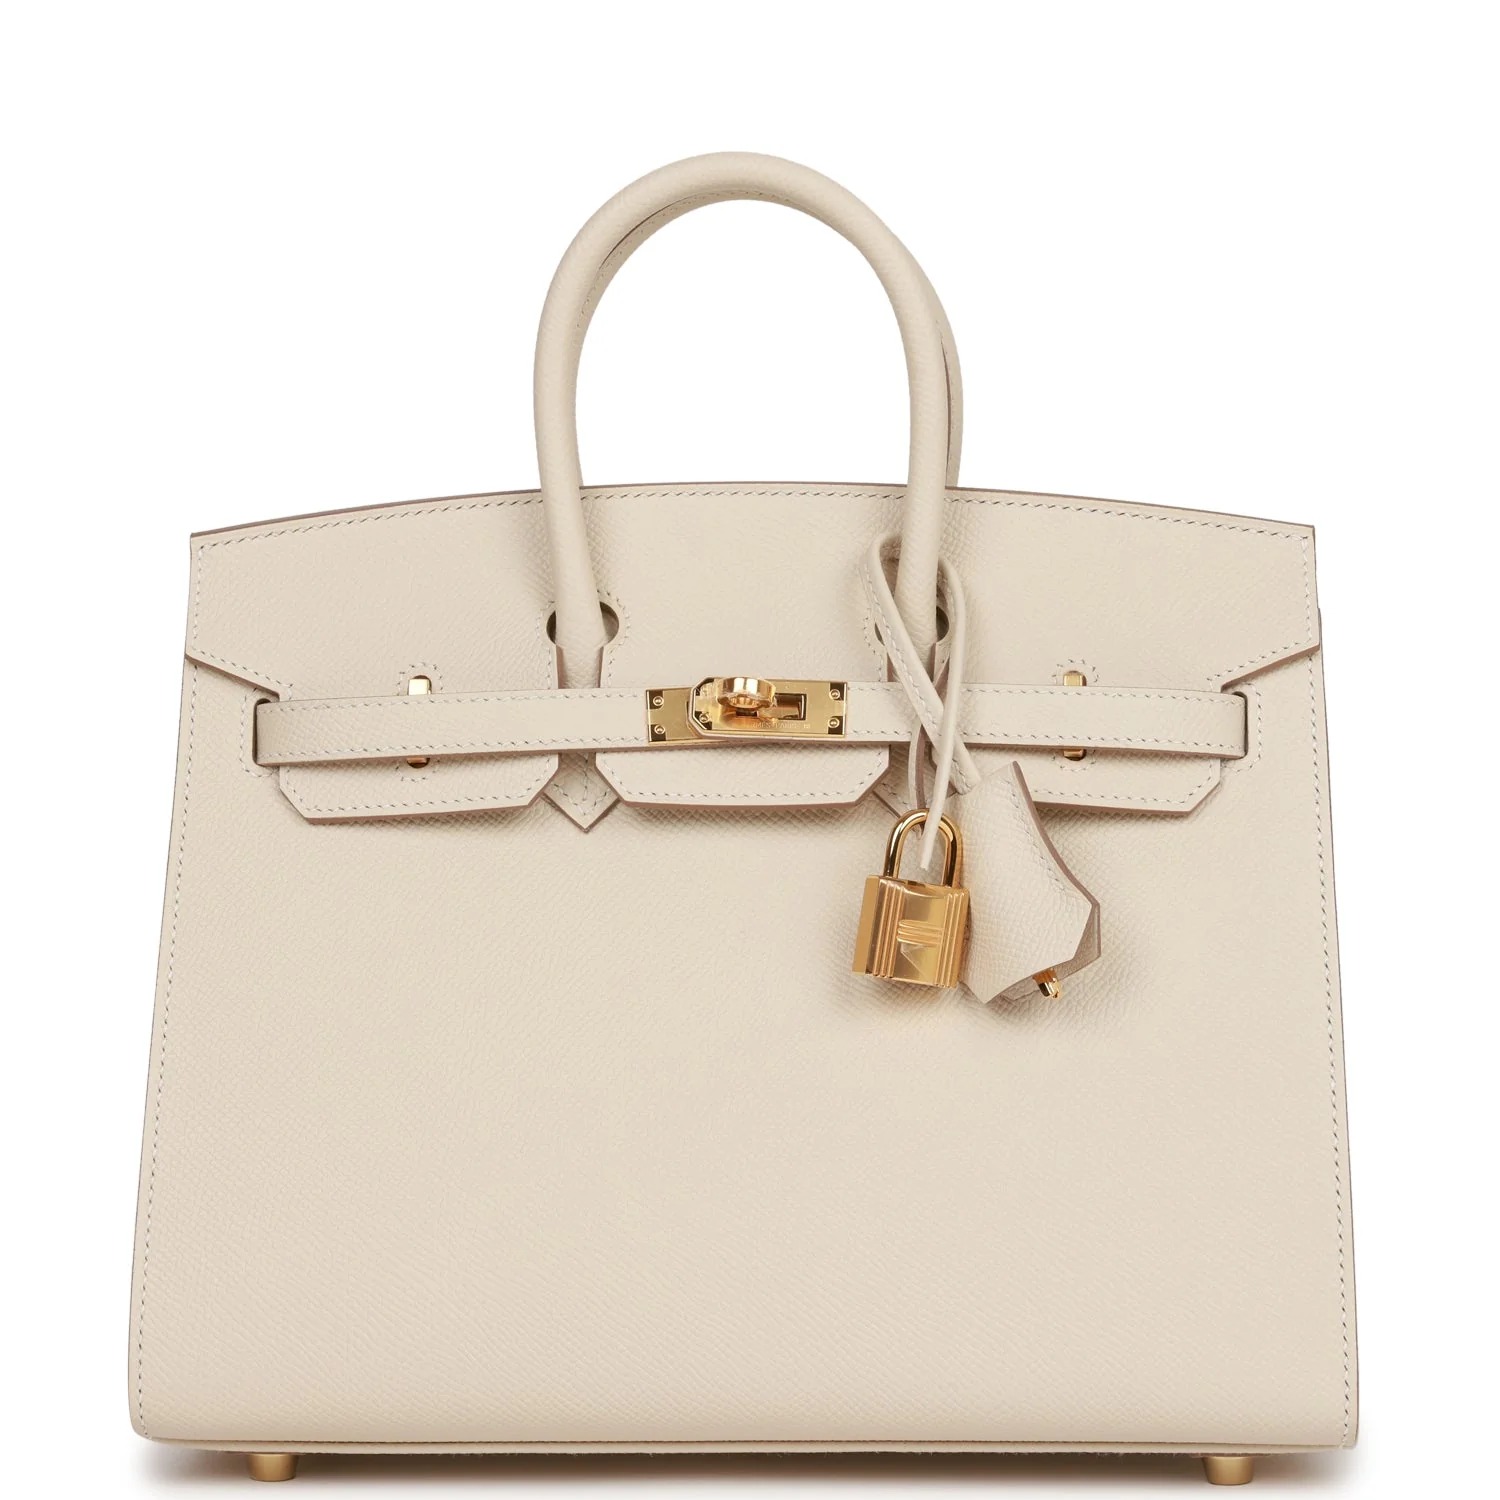 Why Birkin bag are so expensive?